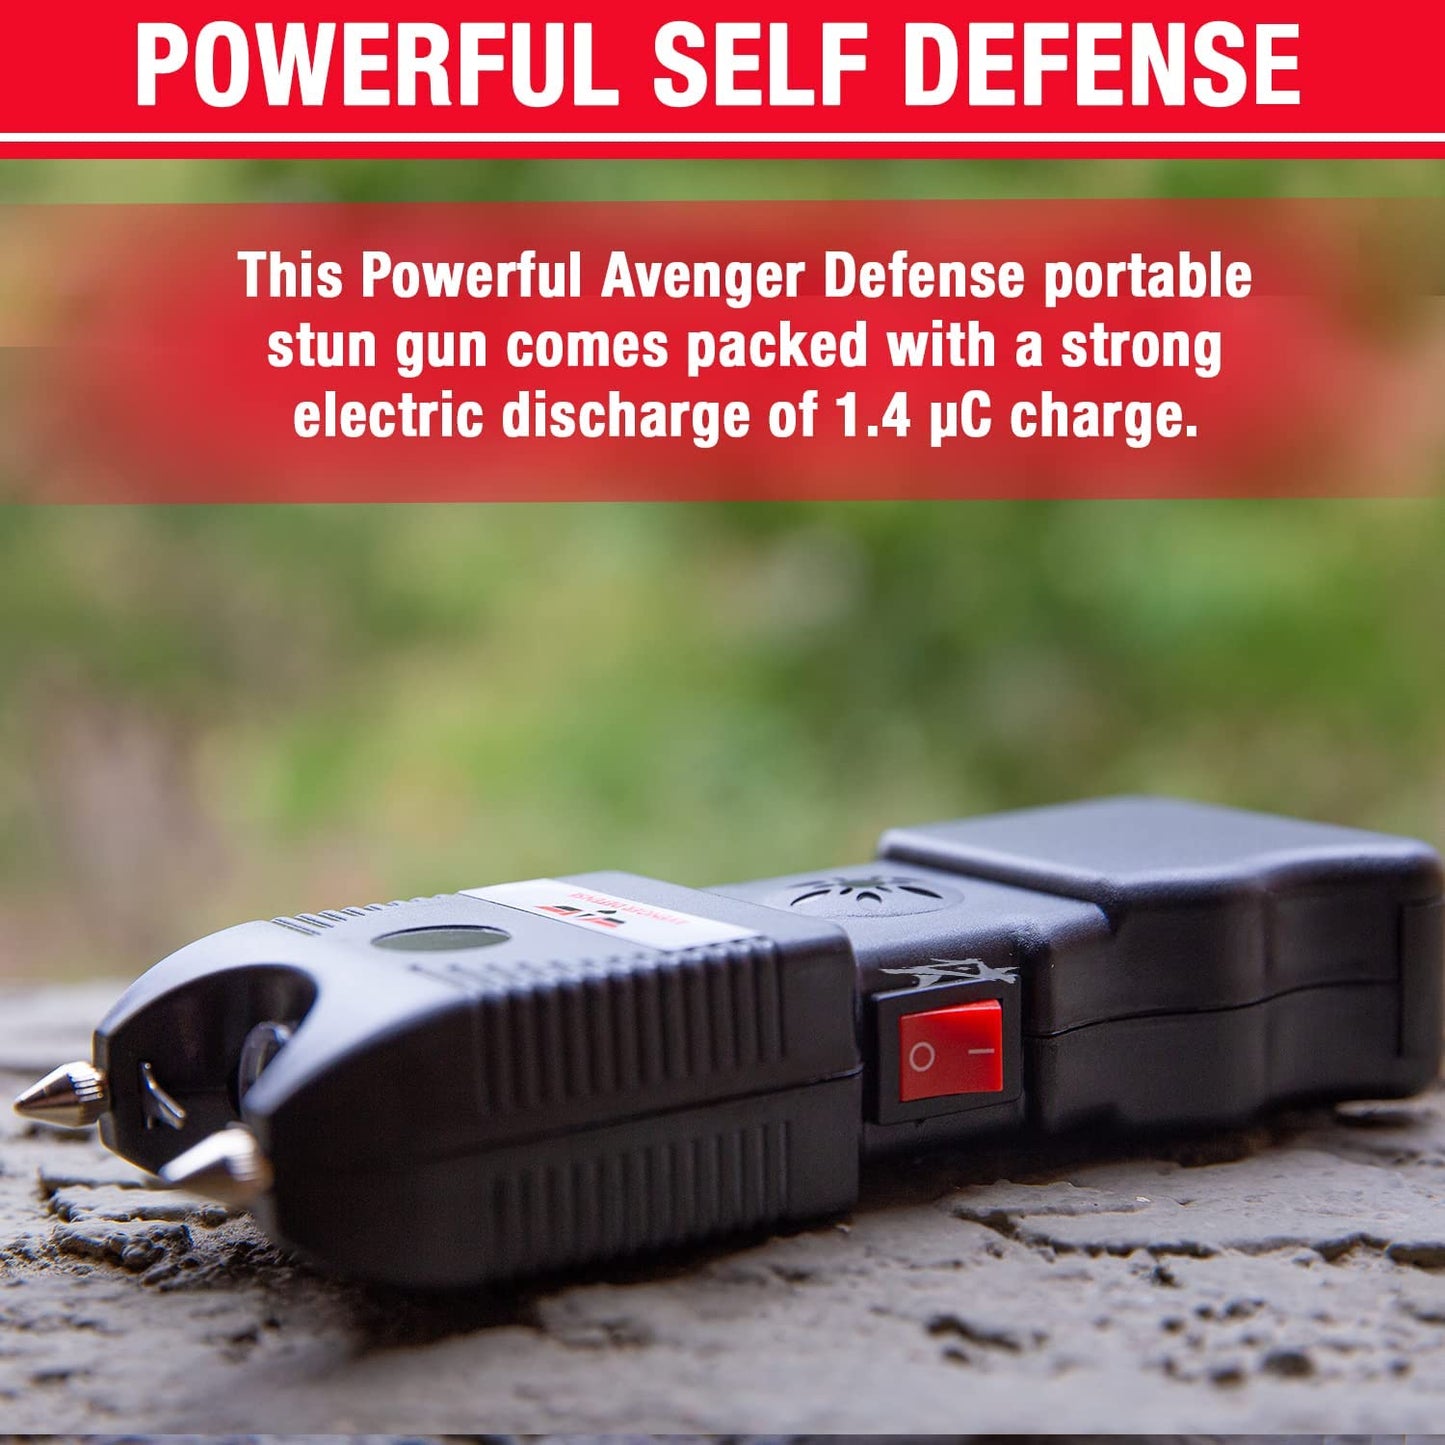 Rechargeable Stun Gun for Self Defense and Protection – Built-In LED Flashlight and Extremely Loud Alarm – Powerful 1.4Uc Electric Charge and 130Db Siren – Metal Prongs